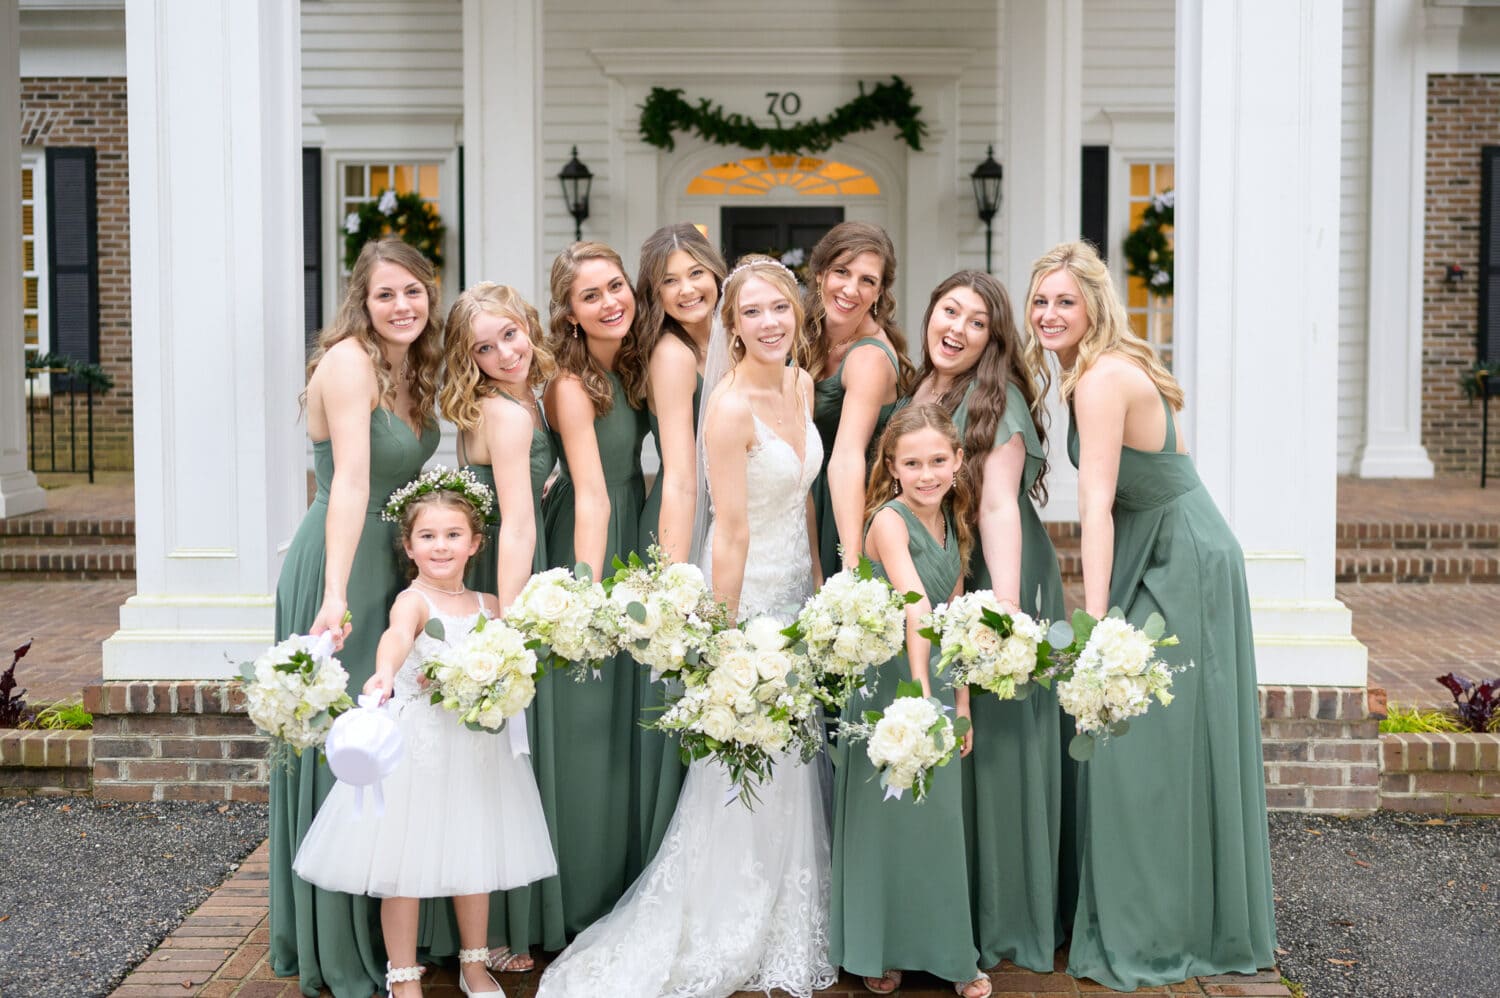 Girls showing off the flowers - Pawleys Plantation Golf & Country Club